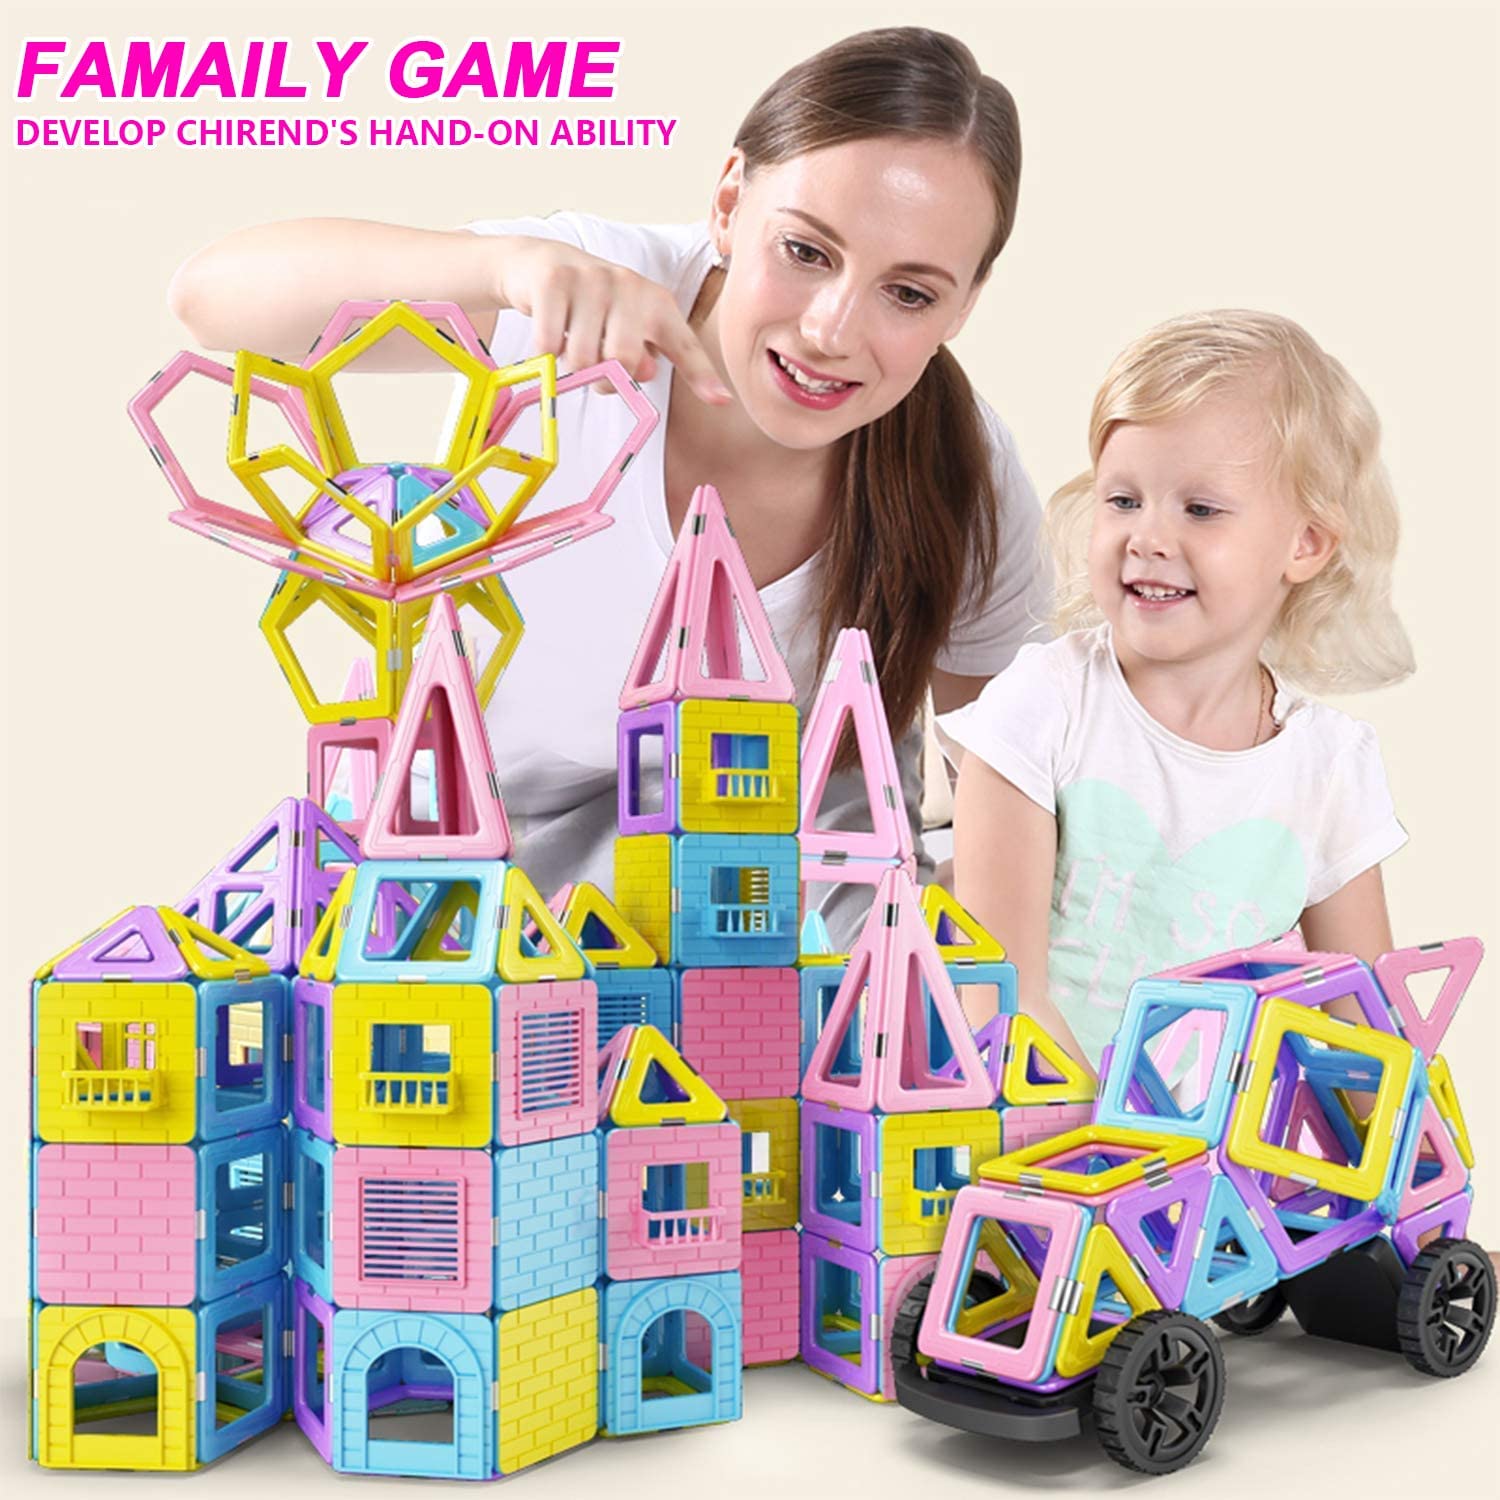 HQXBNBY Magnetic Tiles Toys for 3 Year Old Girl Gifts 124PCS Magnetic Building Blocks Early Educational & Development Toys for Kids Children Age 3 4 5 6 7 8+ Year Old Chrismas Birthday Gifts